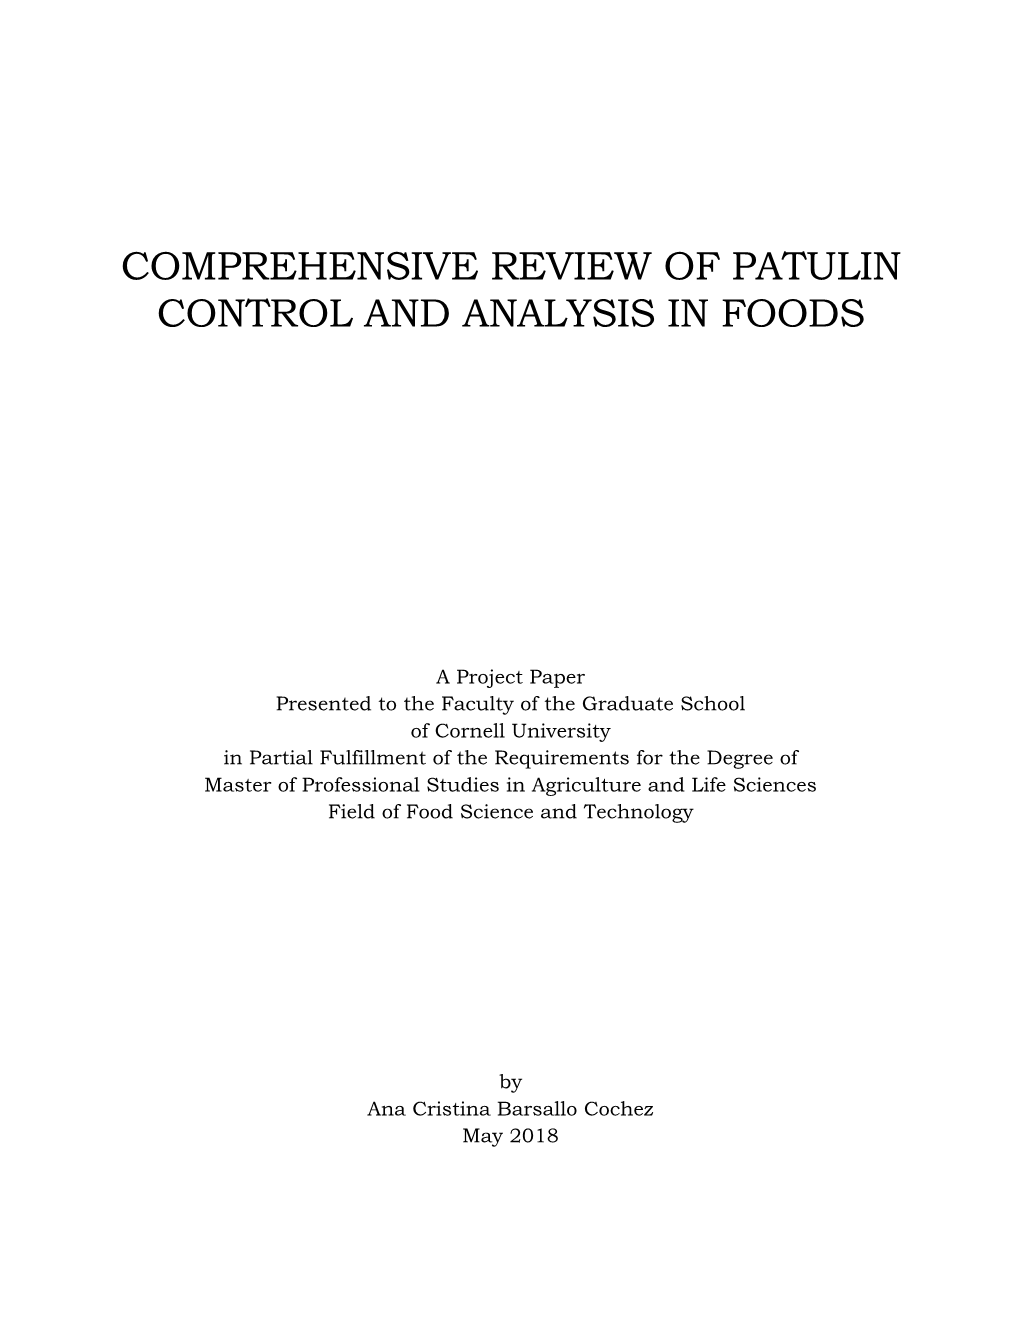 Comprehensive Review of Patulin Control and Analysis in Foods